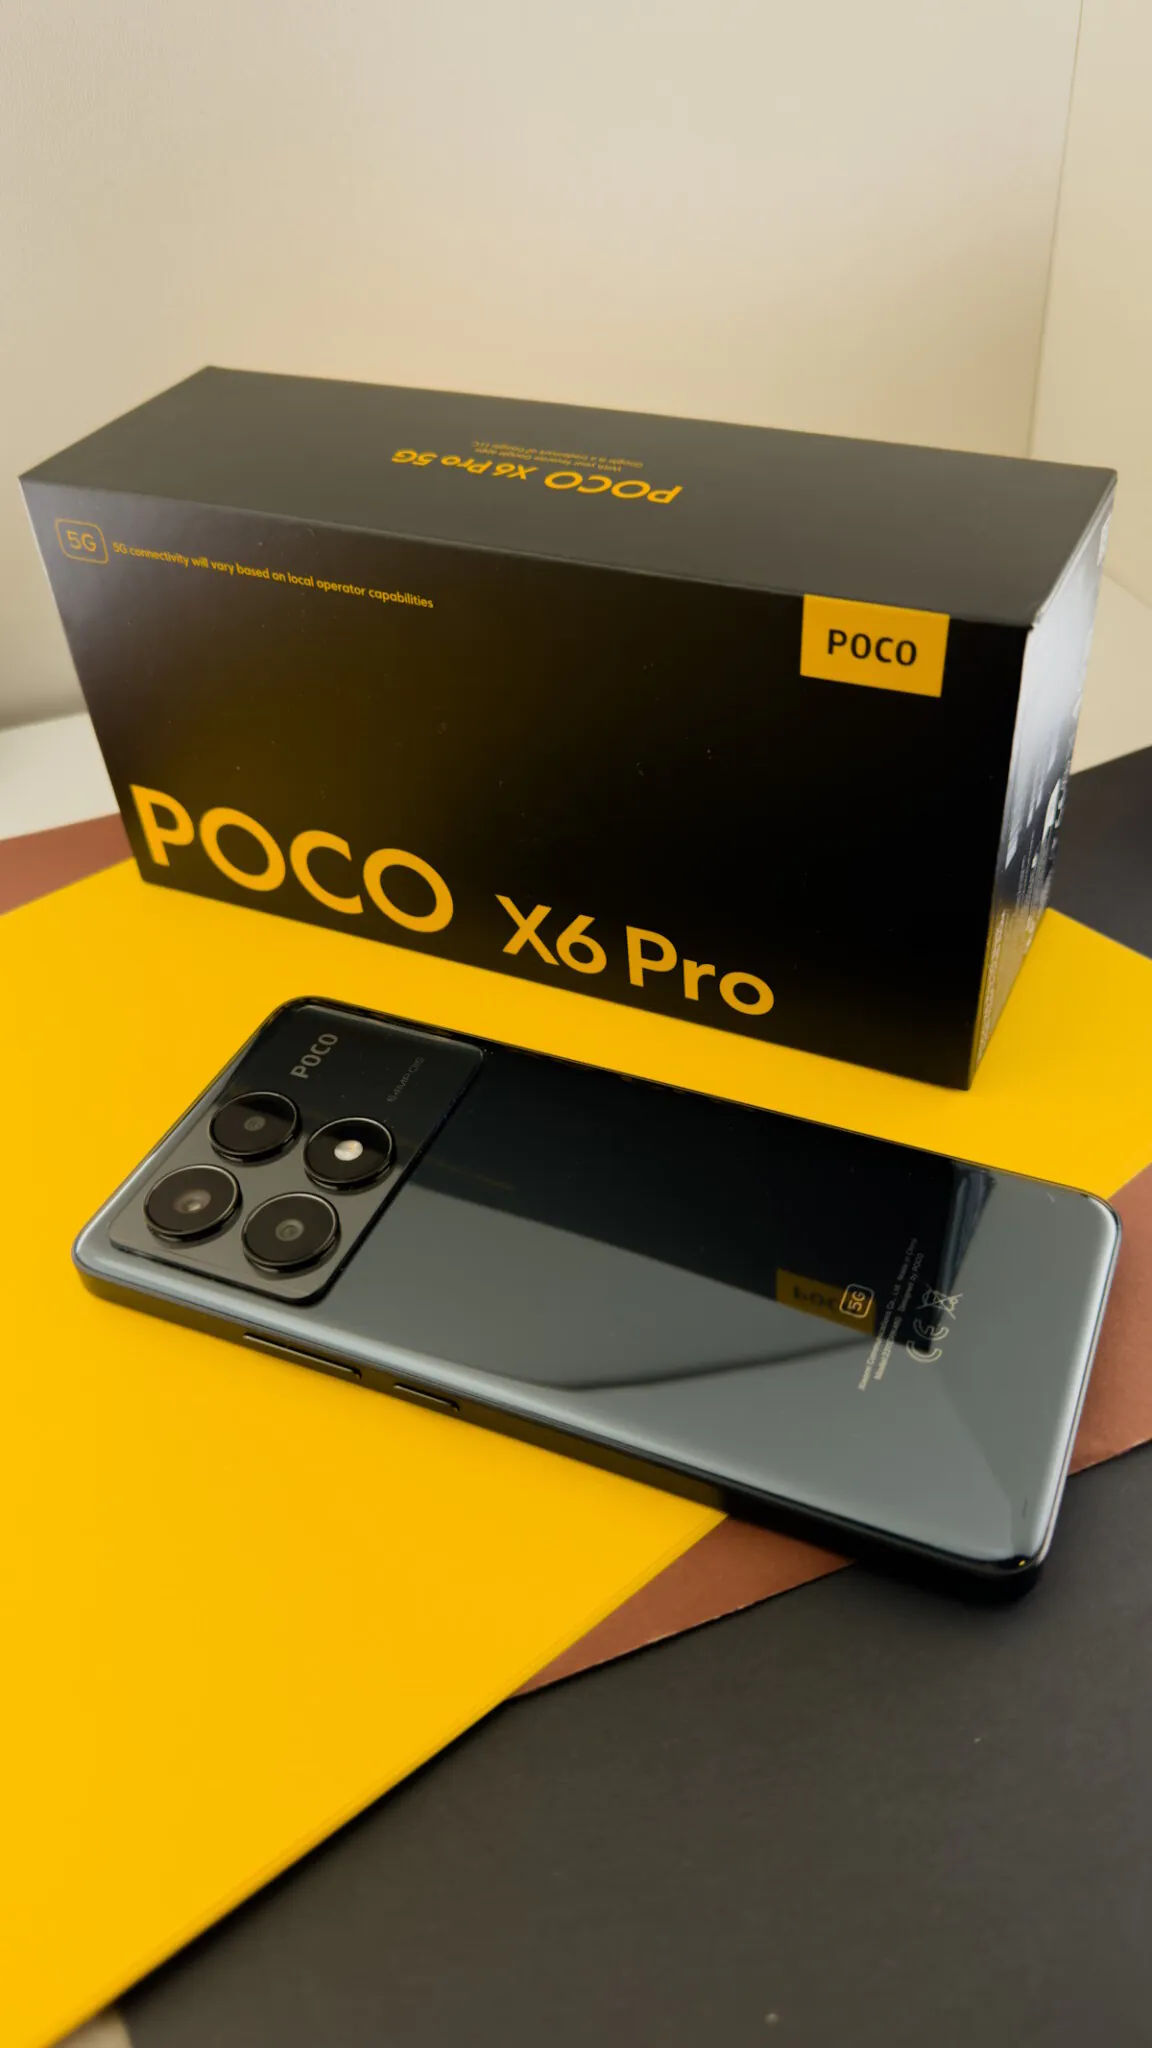 POCO X6 Pro Hands On - The New Value Flagship @24,999 